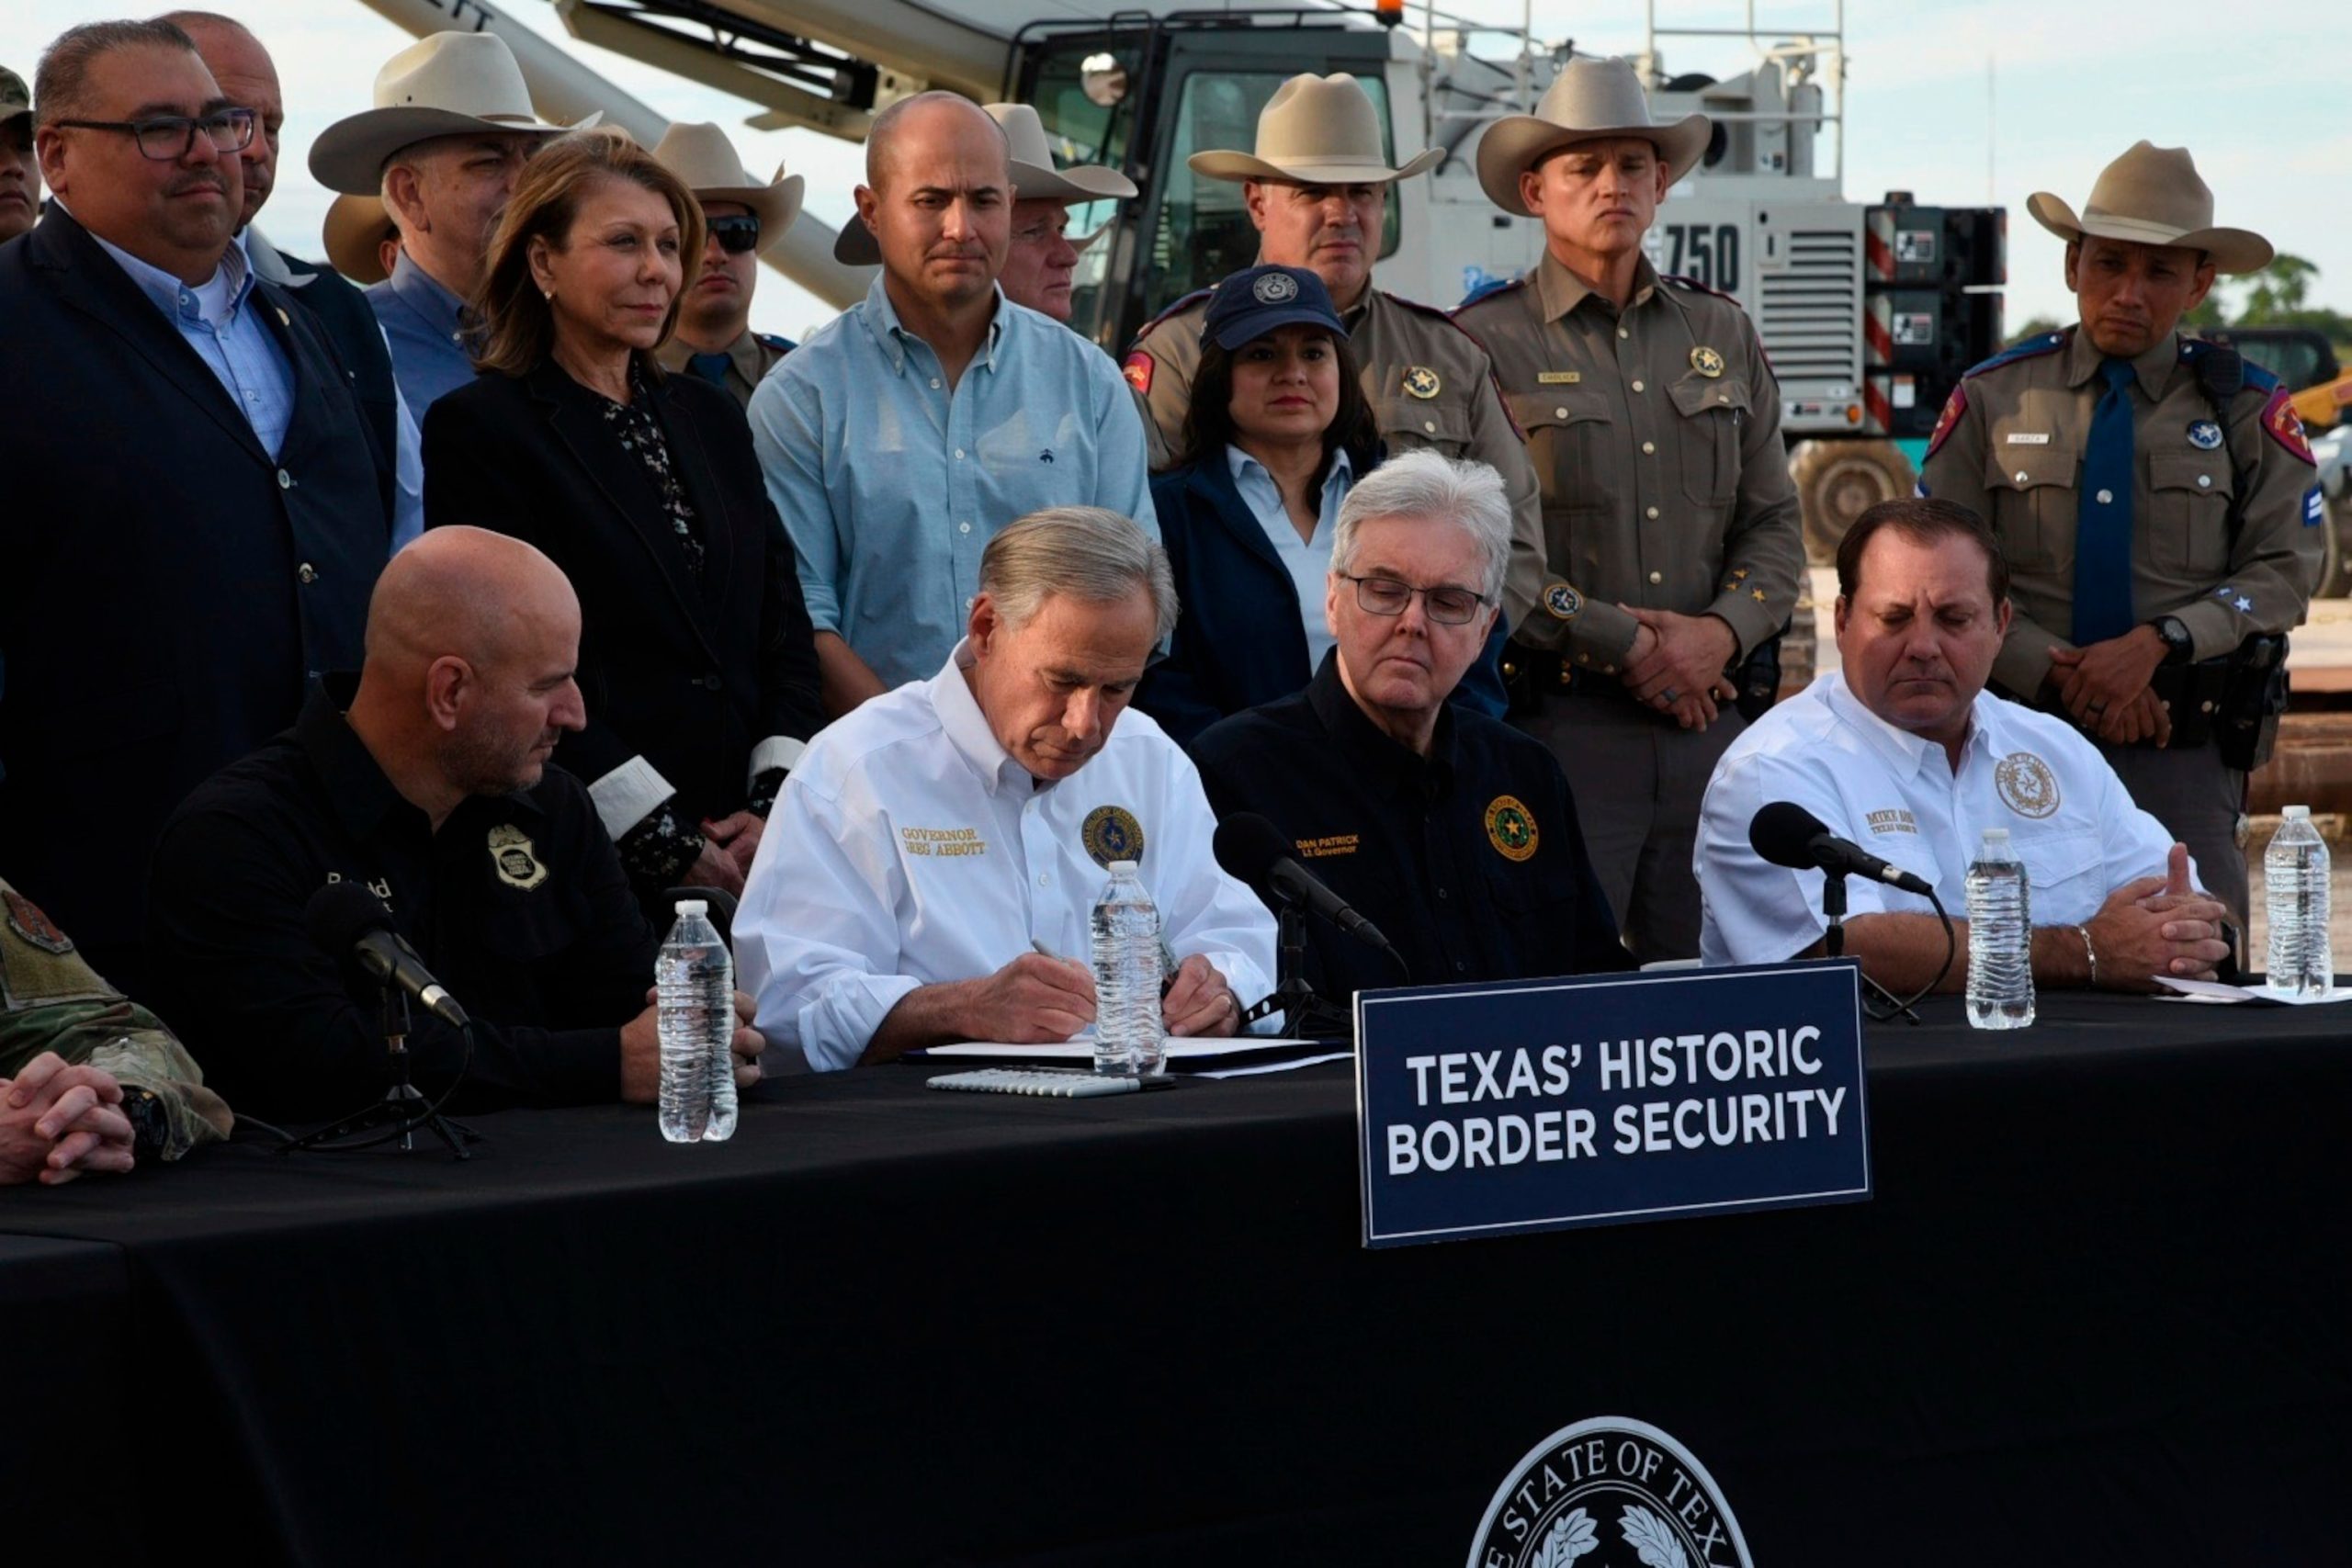 ACLU Takes Legal Action Against Texas Law Granting Police Authority to Detain Migrants